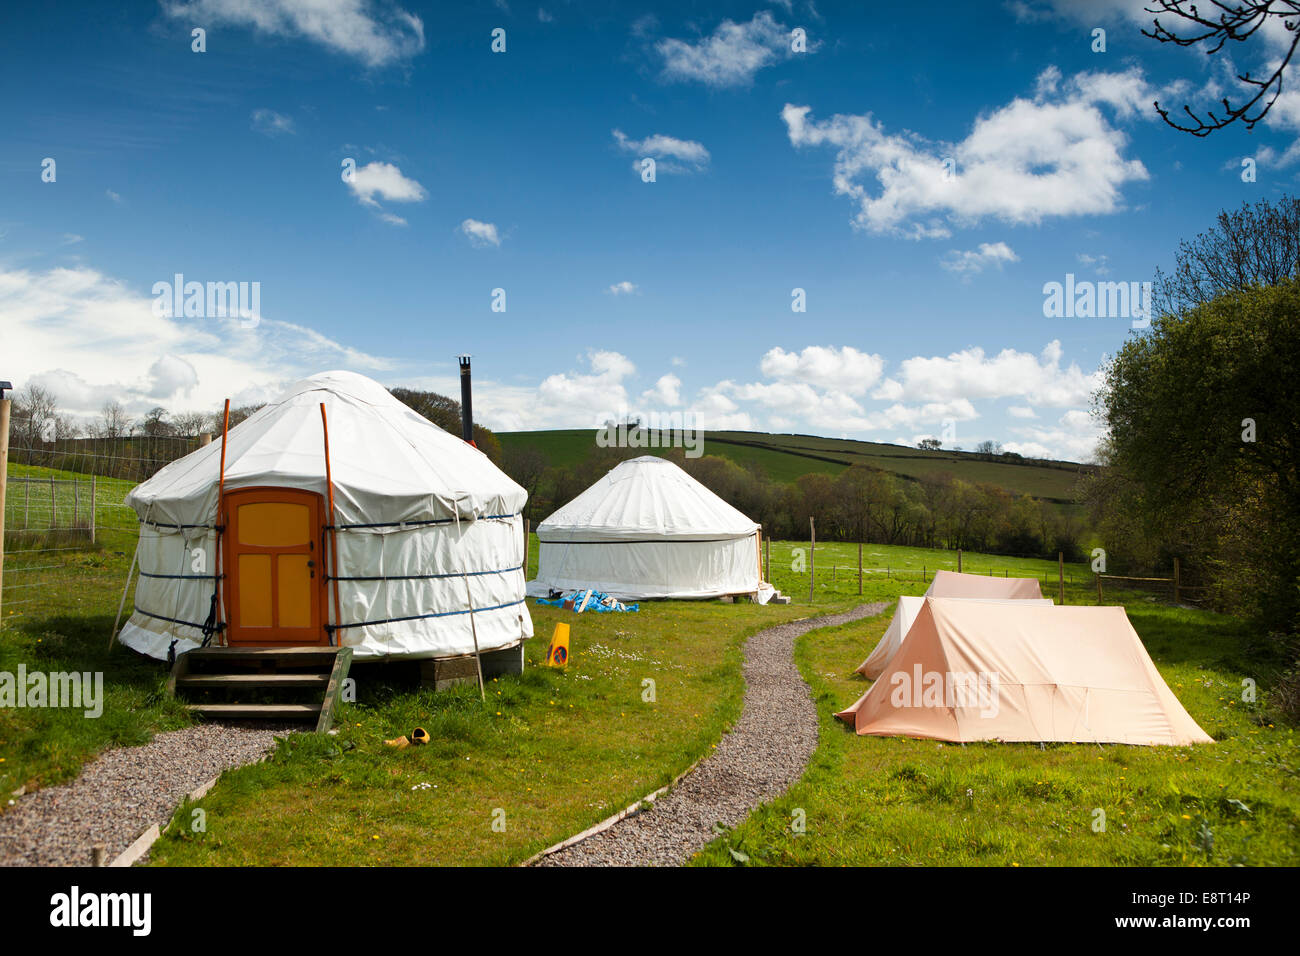 UK, England, Devon, East Yarde, Yarde Orchard Bunkhouse camping ground, yurts and tents Stock Photo